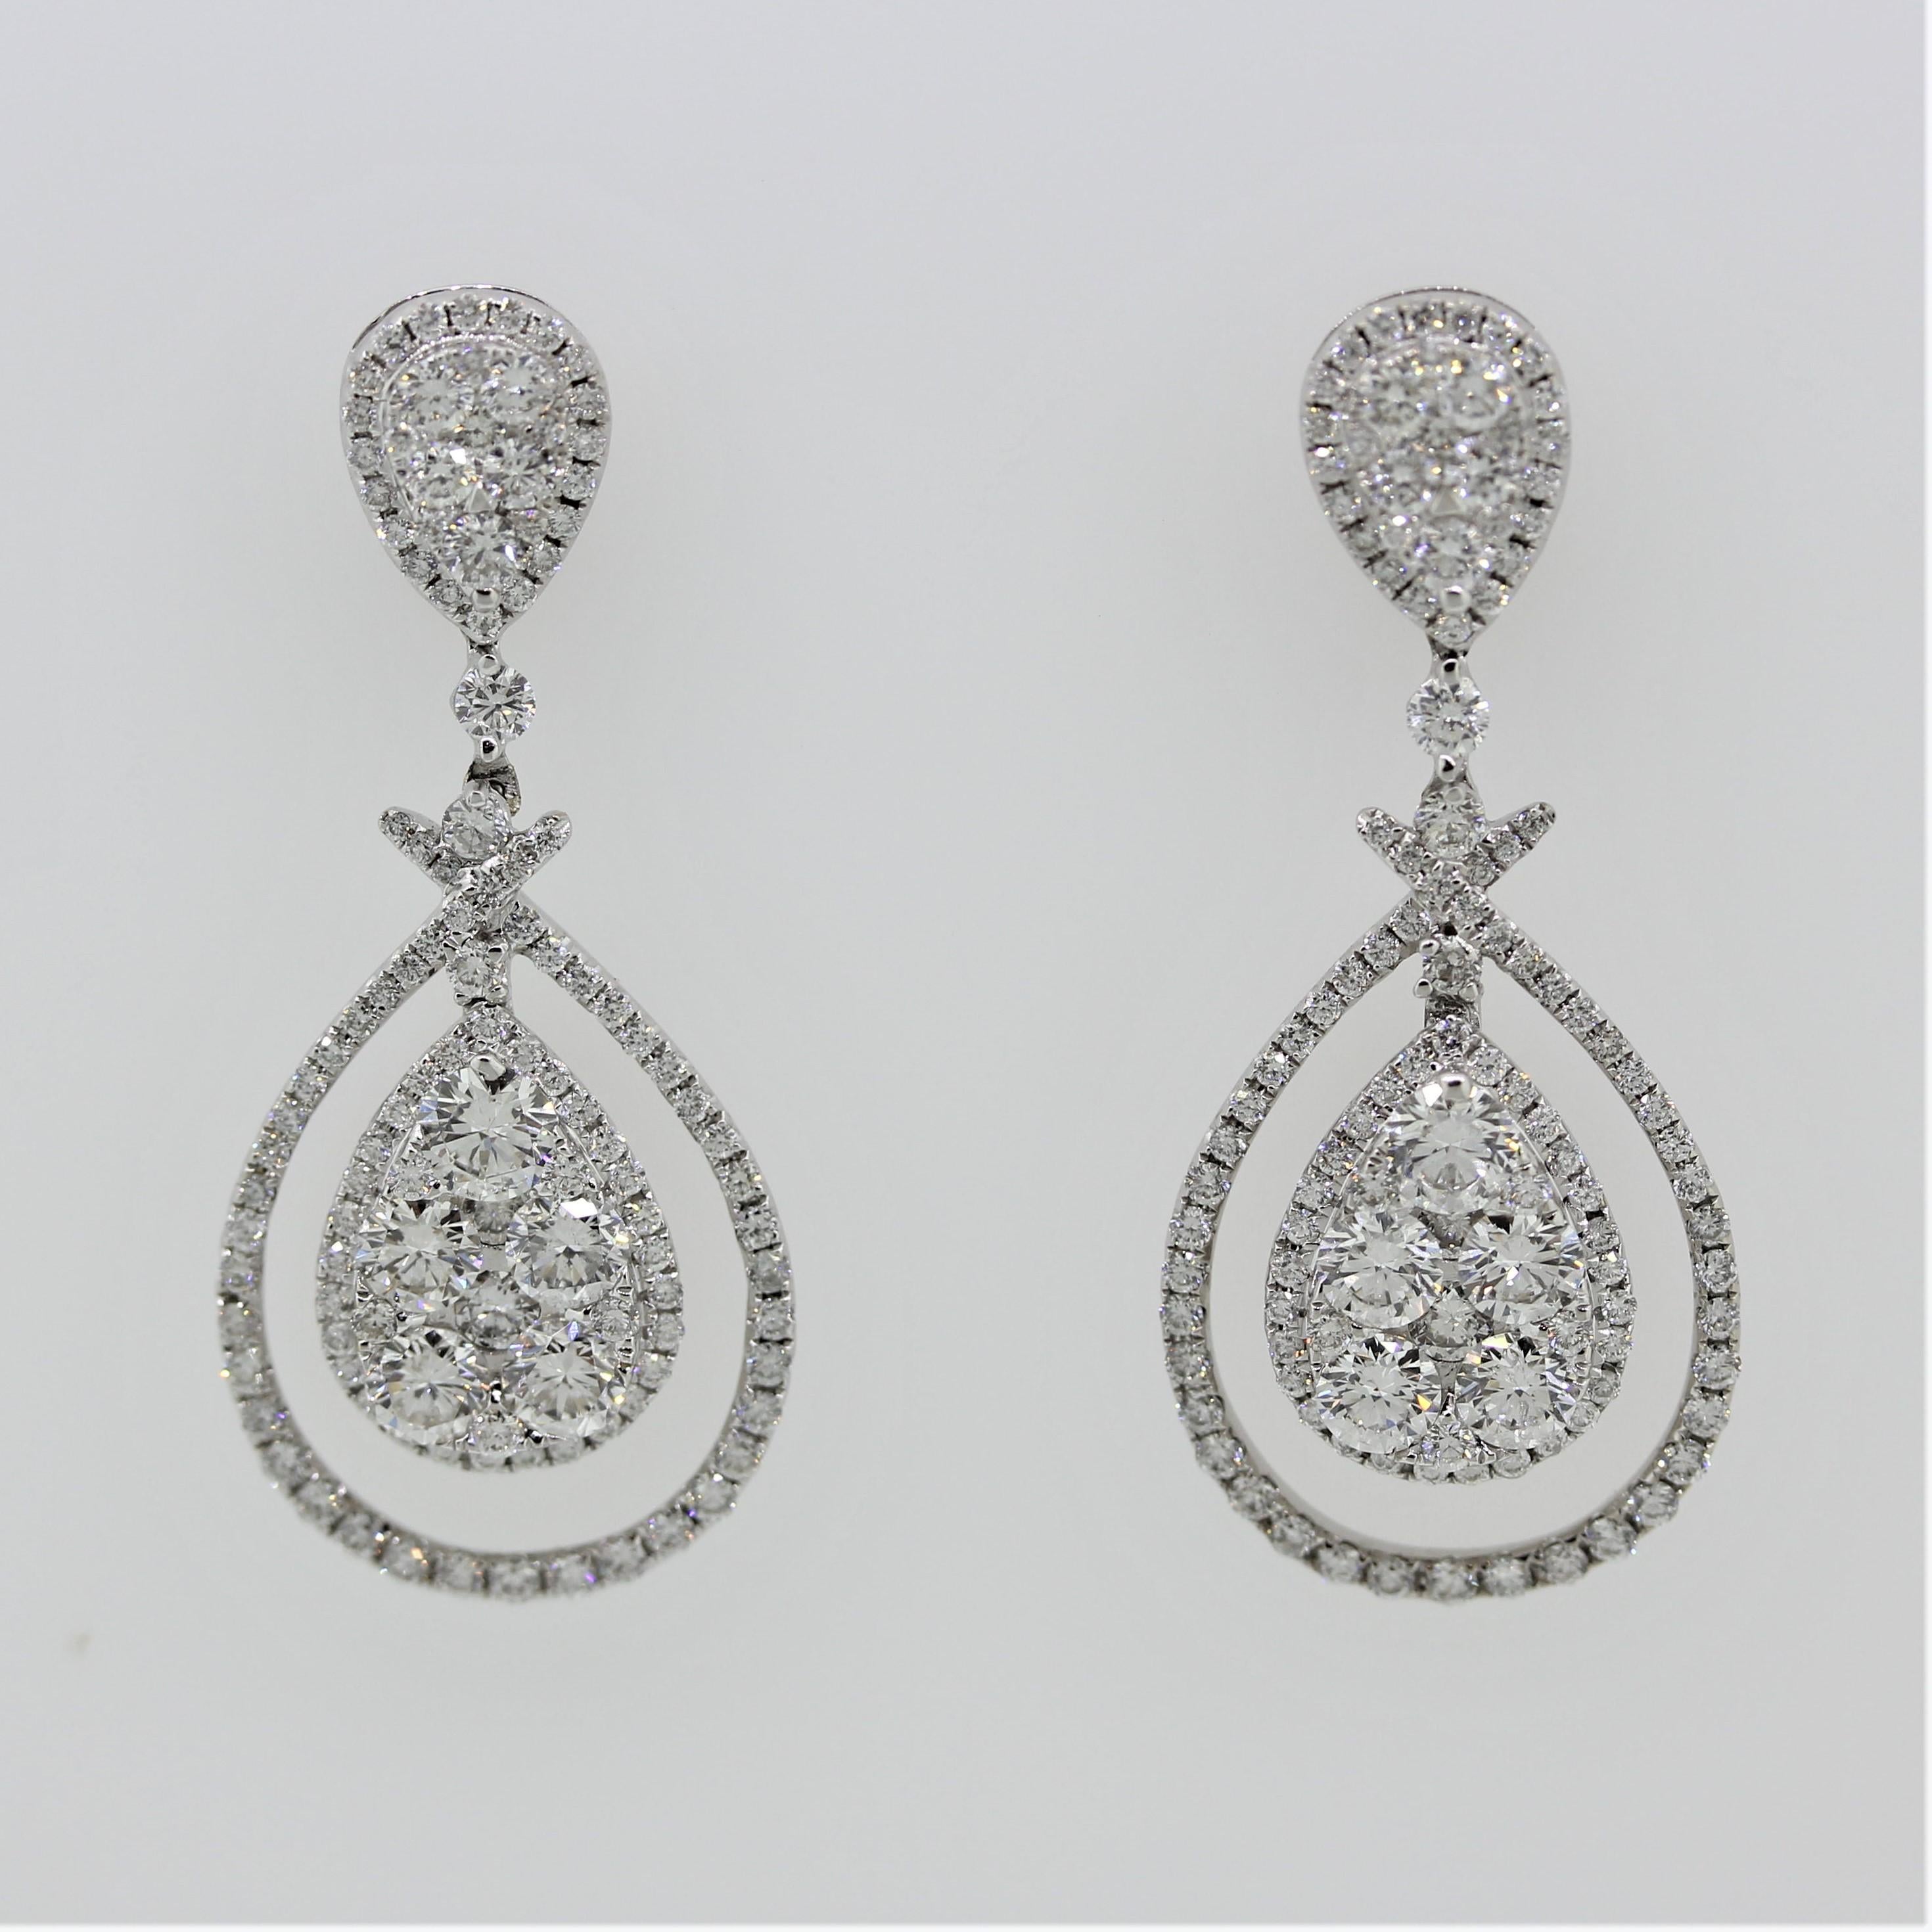 A special pair of earrings featuring a total of 3.45 carats of round brilliant cut diamonds. They are set around the border of the earrings as well as in pear shaped clusters which drop and dangle in the center of the earring. Made in 14k white gold